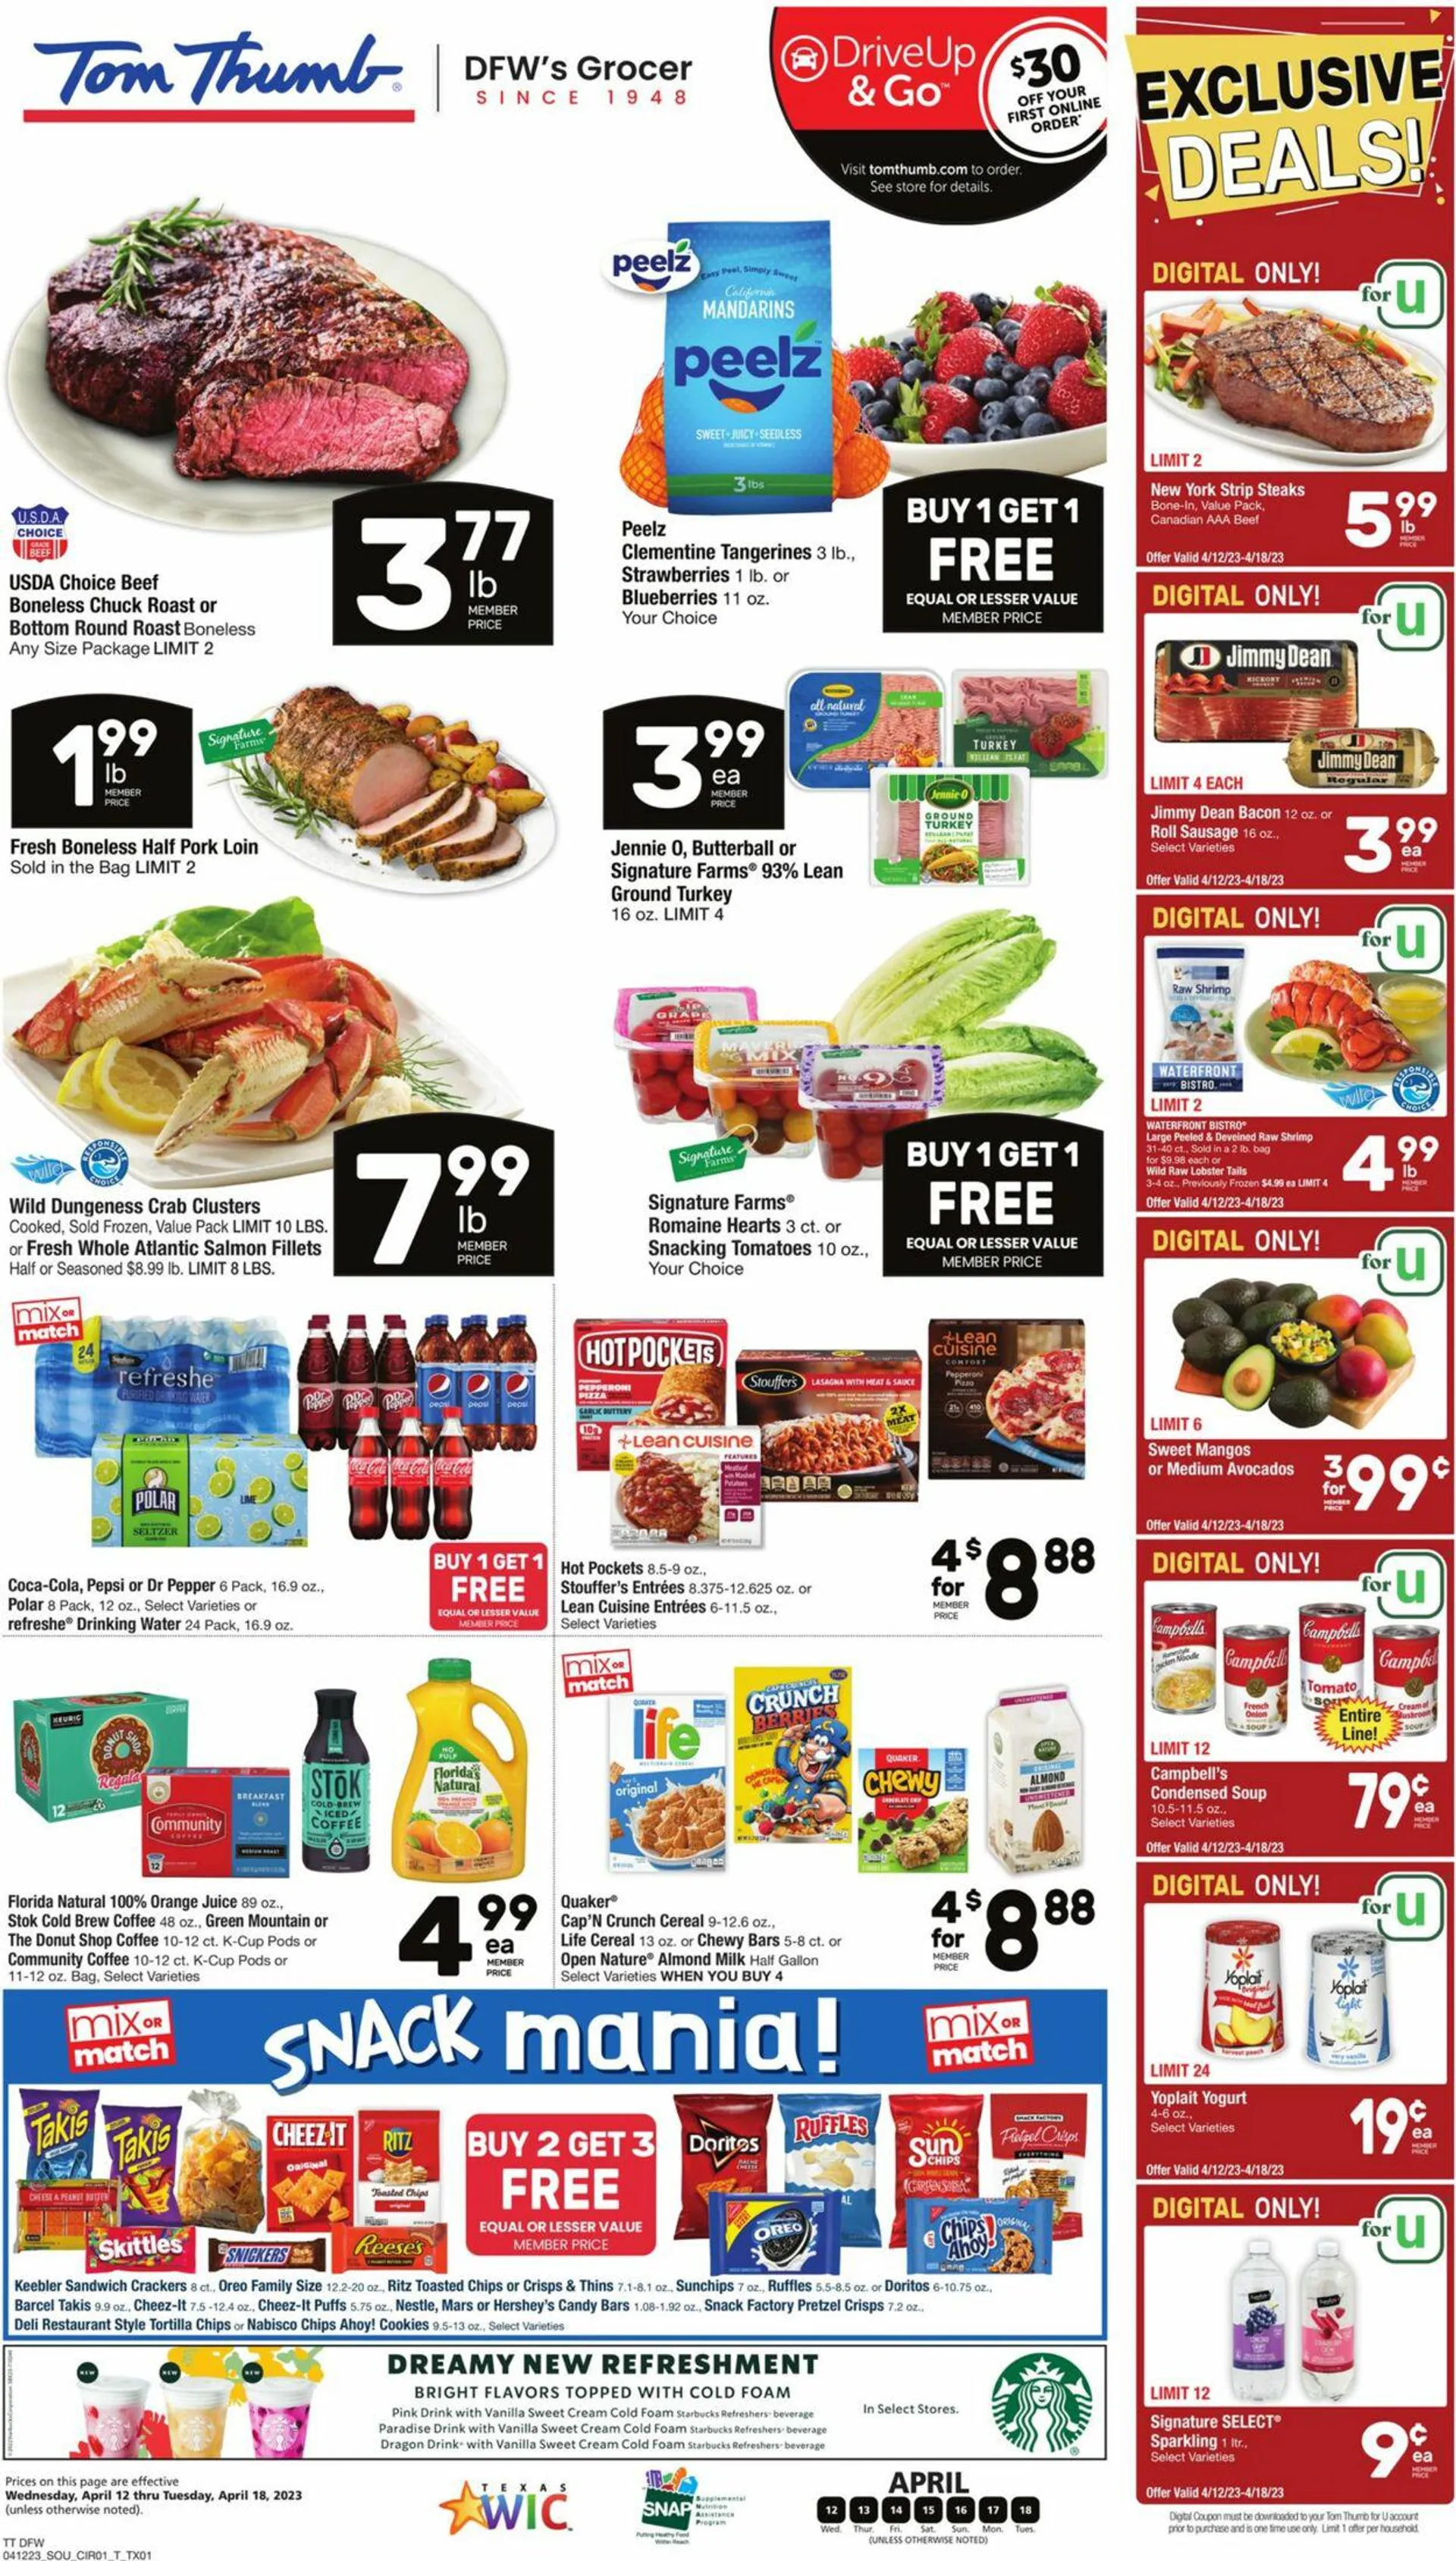 Tom Thumb Current weekly ad - 1